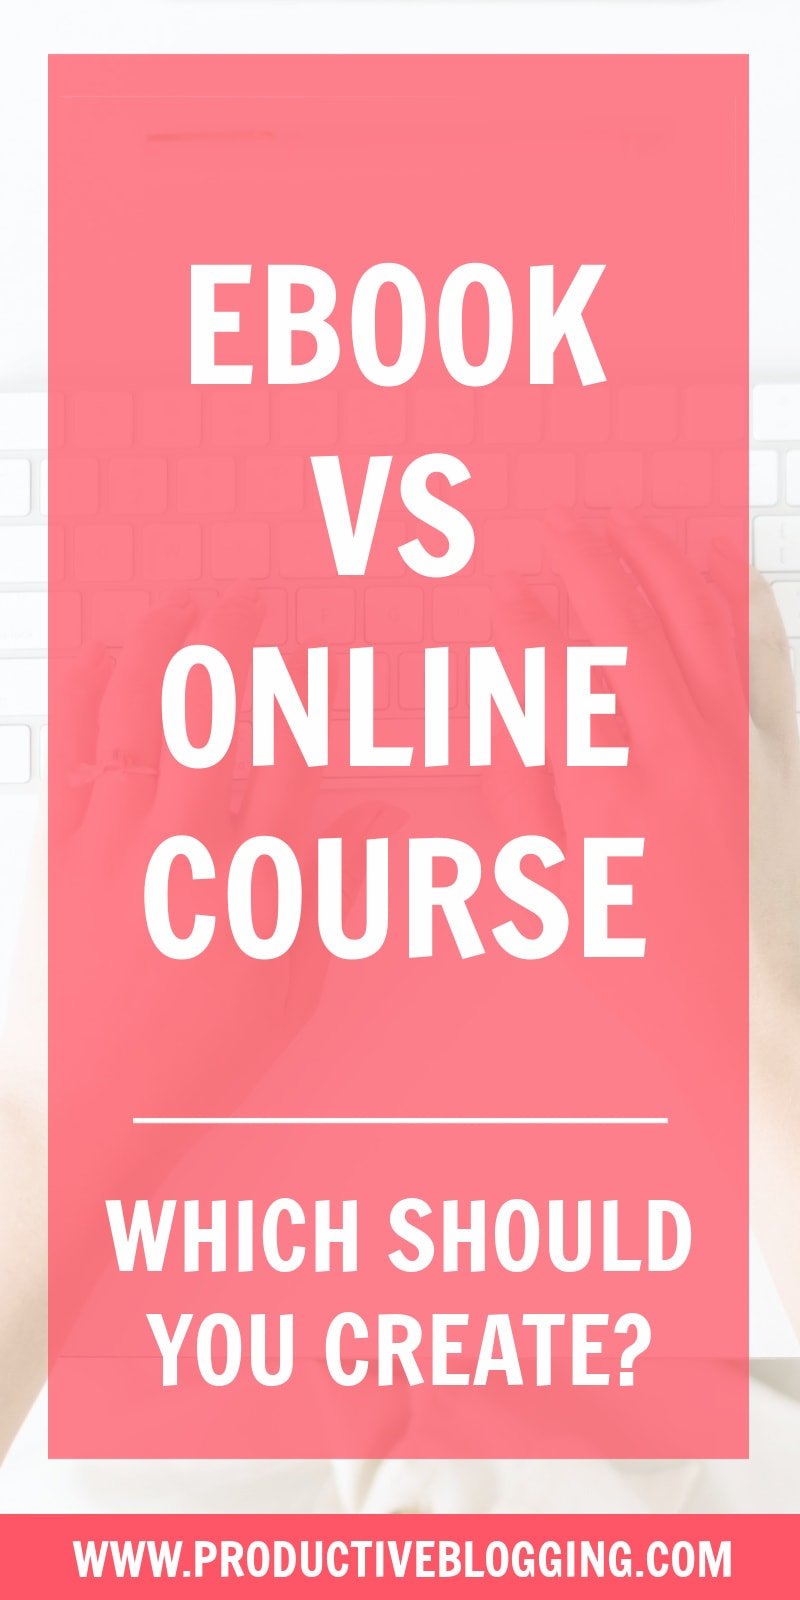 Ebooks and online courses are two of the most popular digital products out there. But which should you create? Which one is easiest to make? And which one will be most profitable? #ebook #ebookcreation #onlinecoursecreation #onlinecourse #digitalproduct #makemoneyblogging #monetizeyourblog #passiveincome #earnpassiveincome #passiveincomeblogging #blogginglife #bloglife #professionalblogger #bloggingismyjob #solopreneur #mompreneur #fempreneur #bloggingbiz #bloggingtips  #productiveblogging